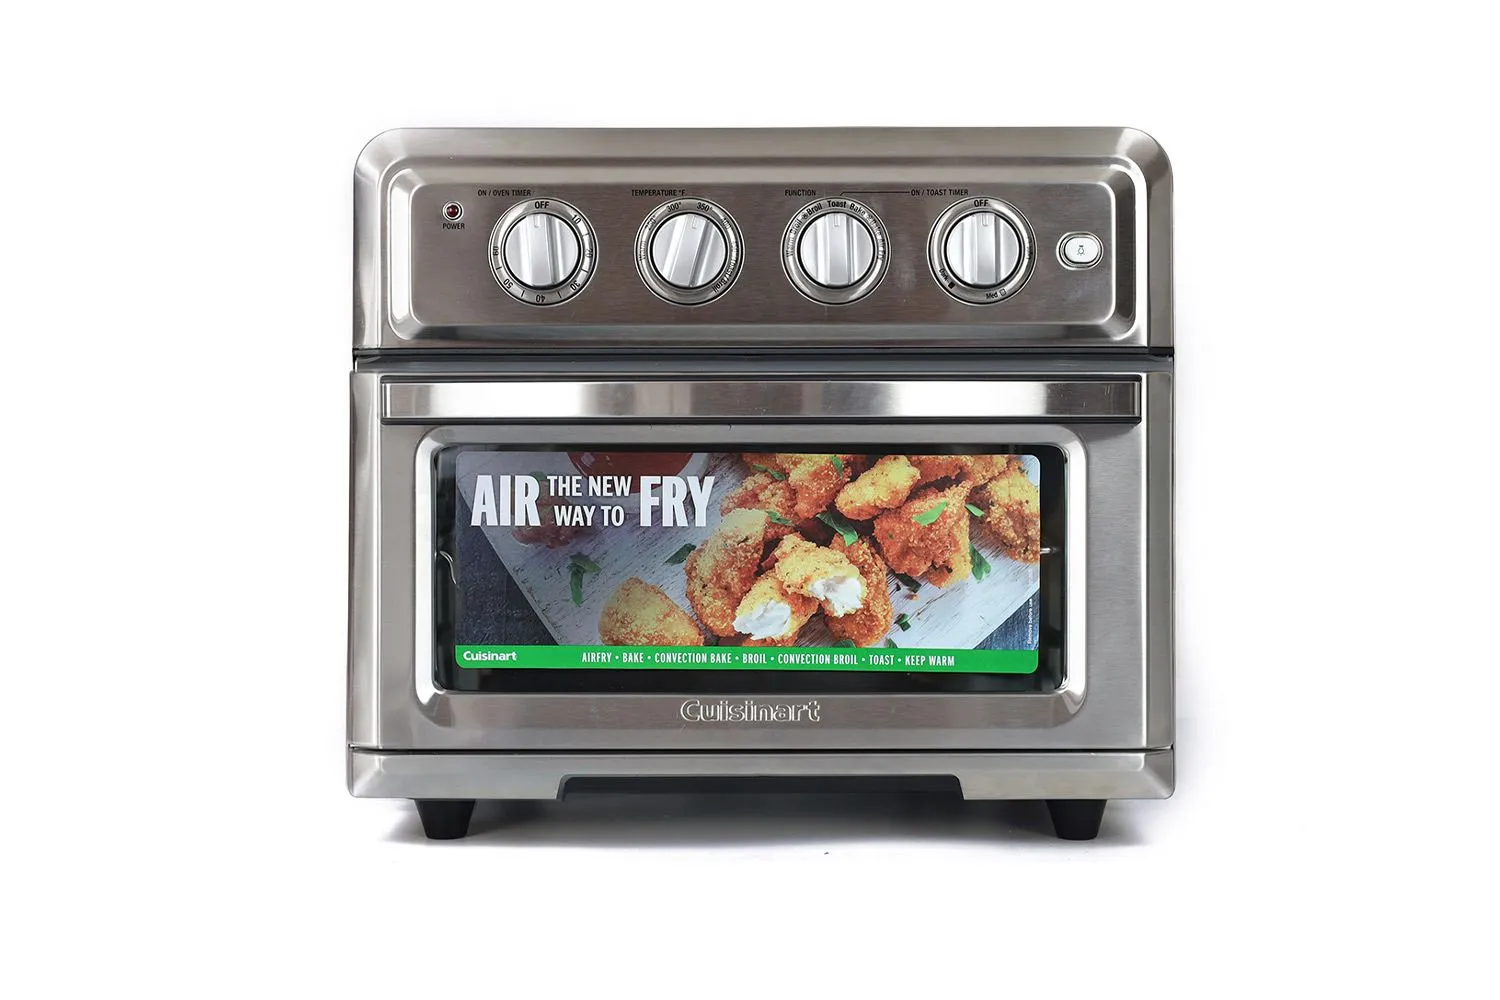 Cuisinart TOA-60 vs Toshiba AC25CEW-BS Toaster Oven: Definitive Best or  Best Value